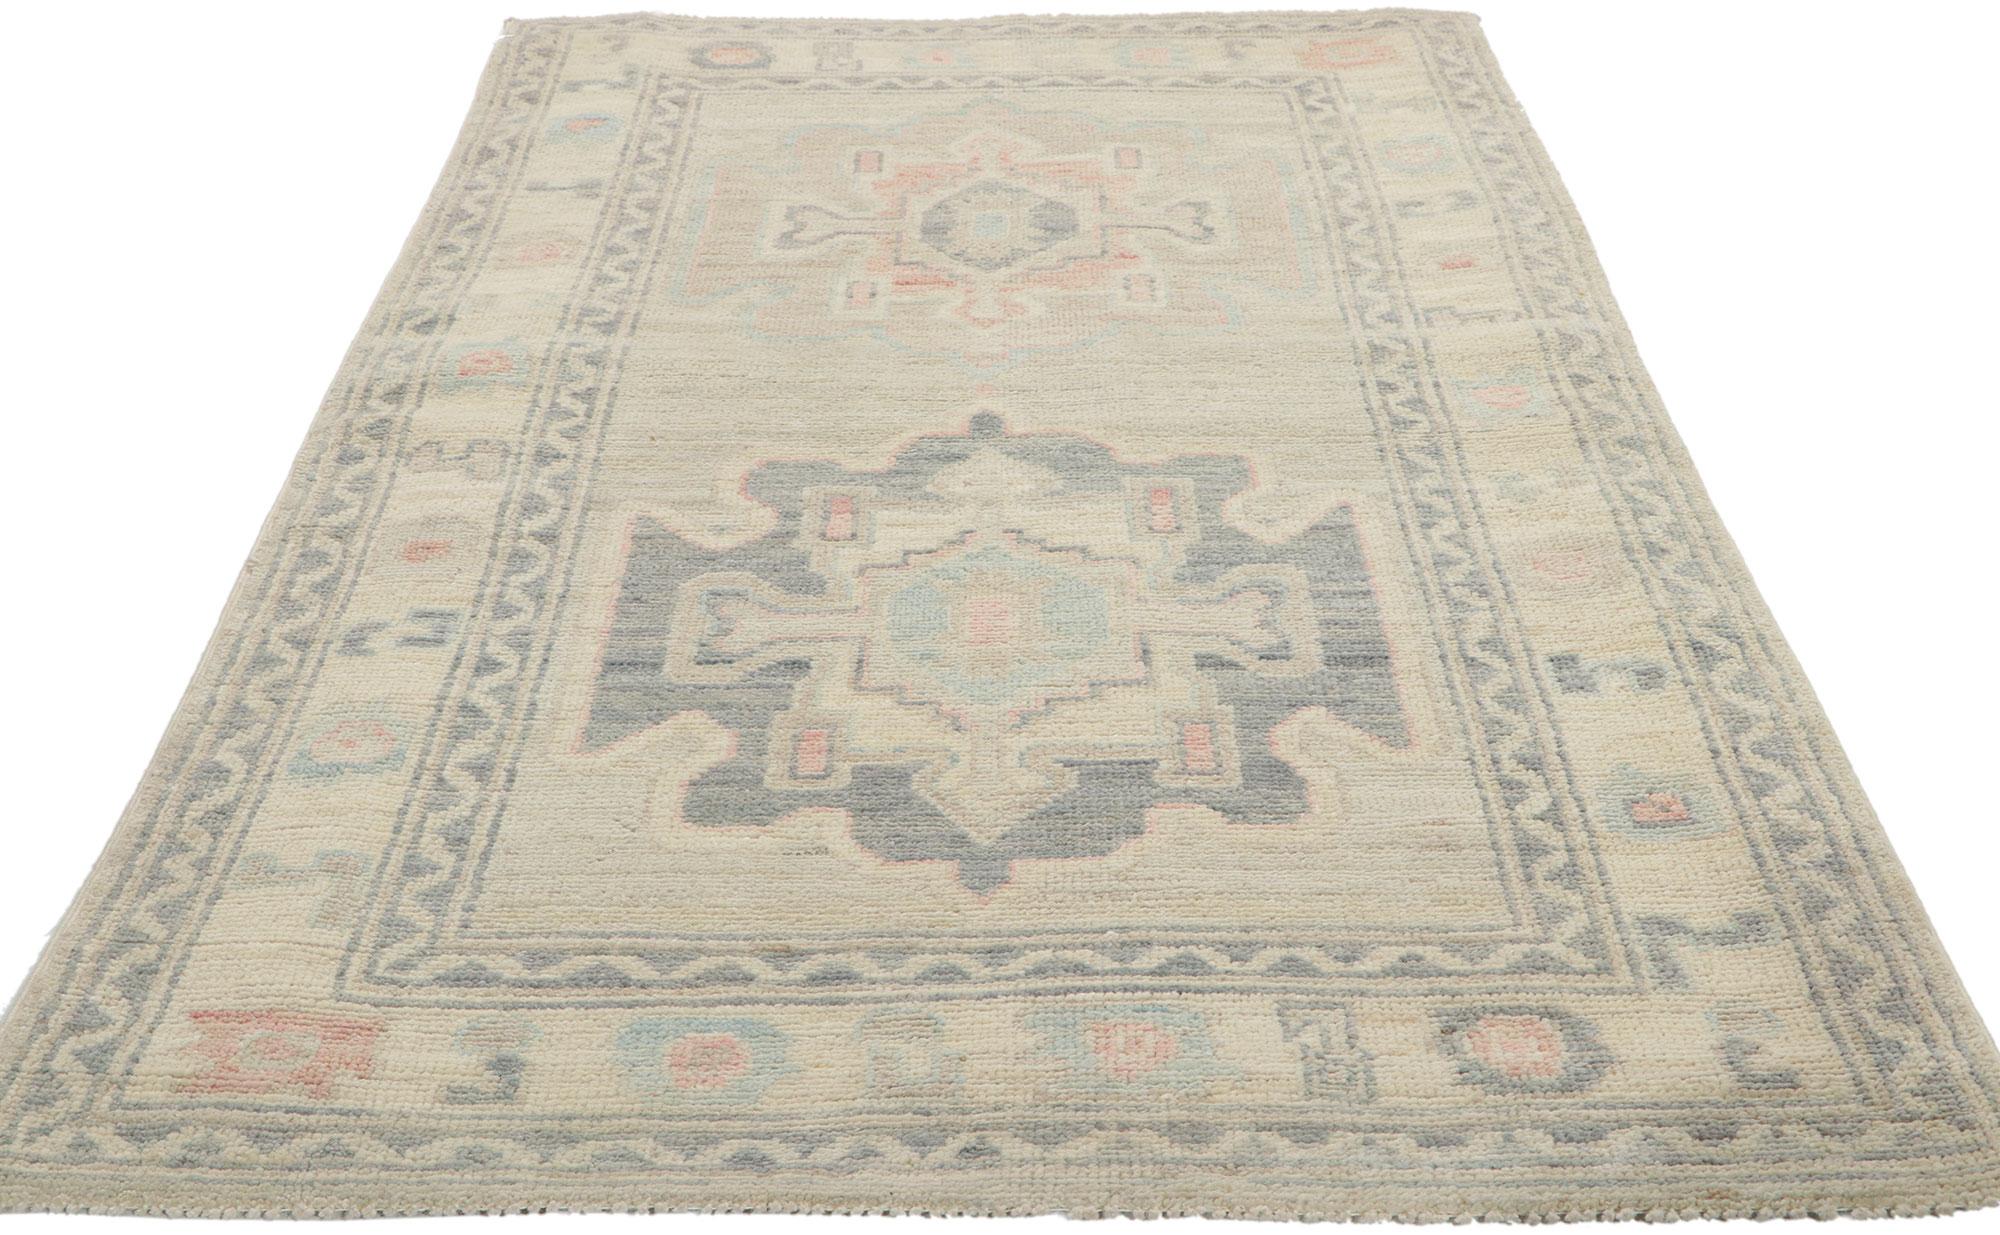 Pakistani Modern Muted Pastel Oushak Rug, Contemporary Elegance Meets Quiet Sophistication For Sale